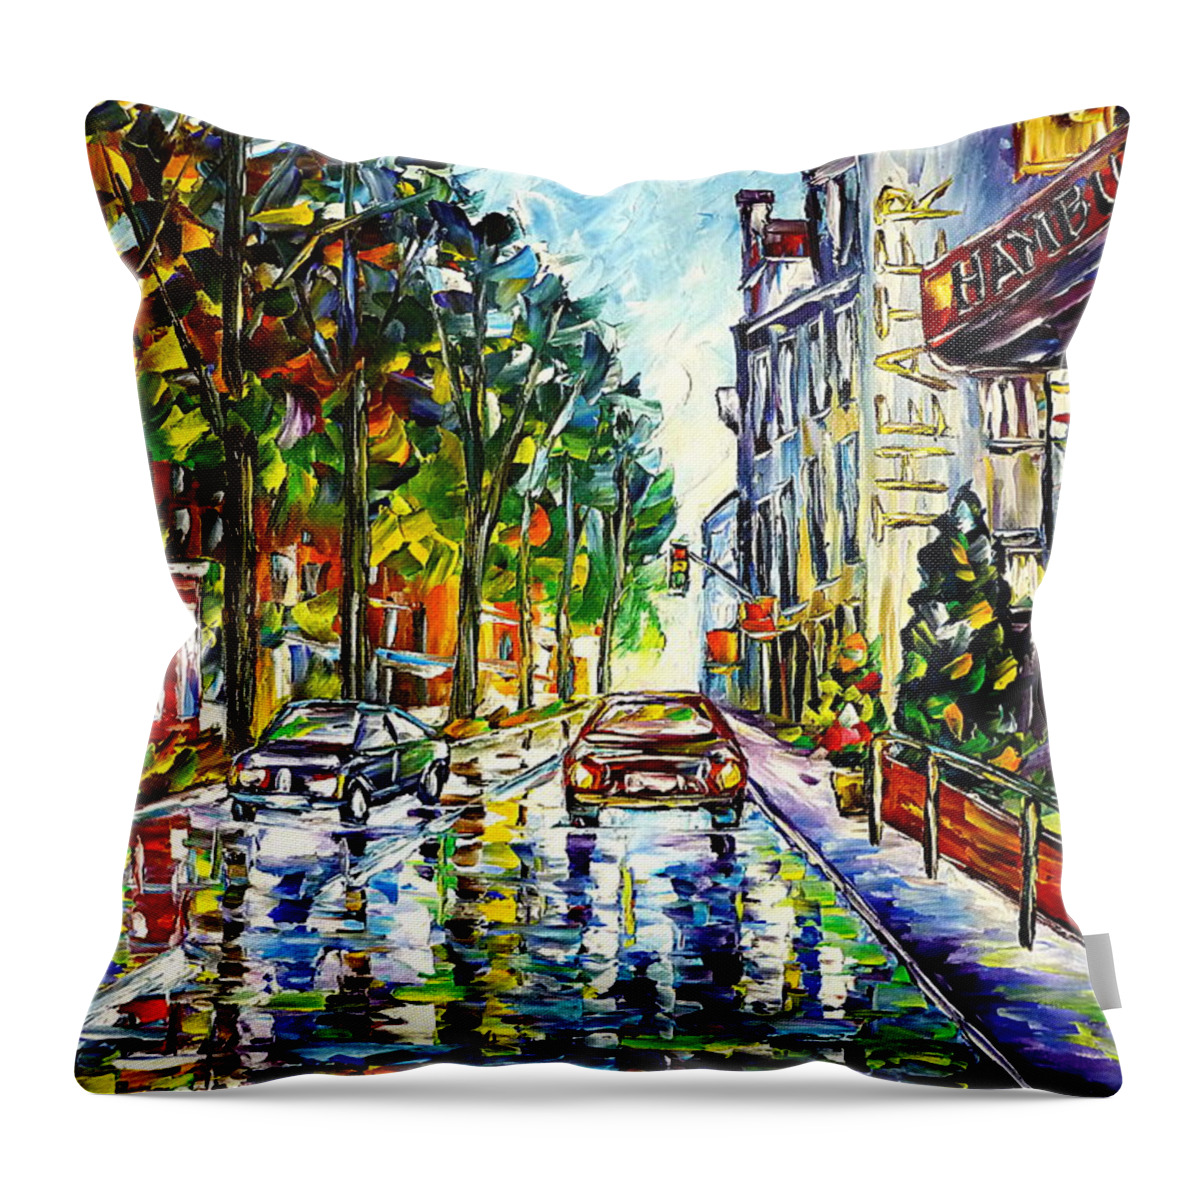 Cityscape Throw Pillow featuring the painting Spring In Hamburg by Mirek Kuzniar